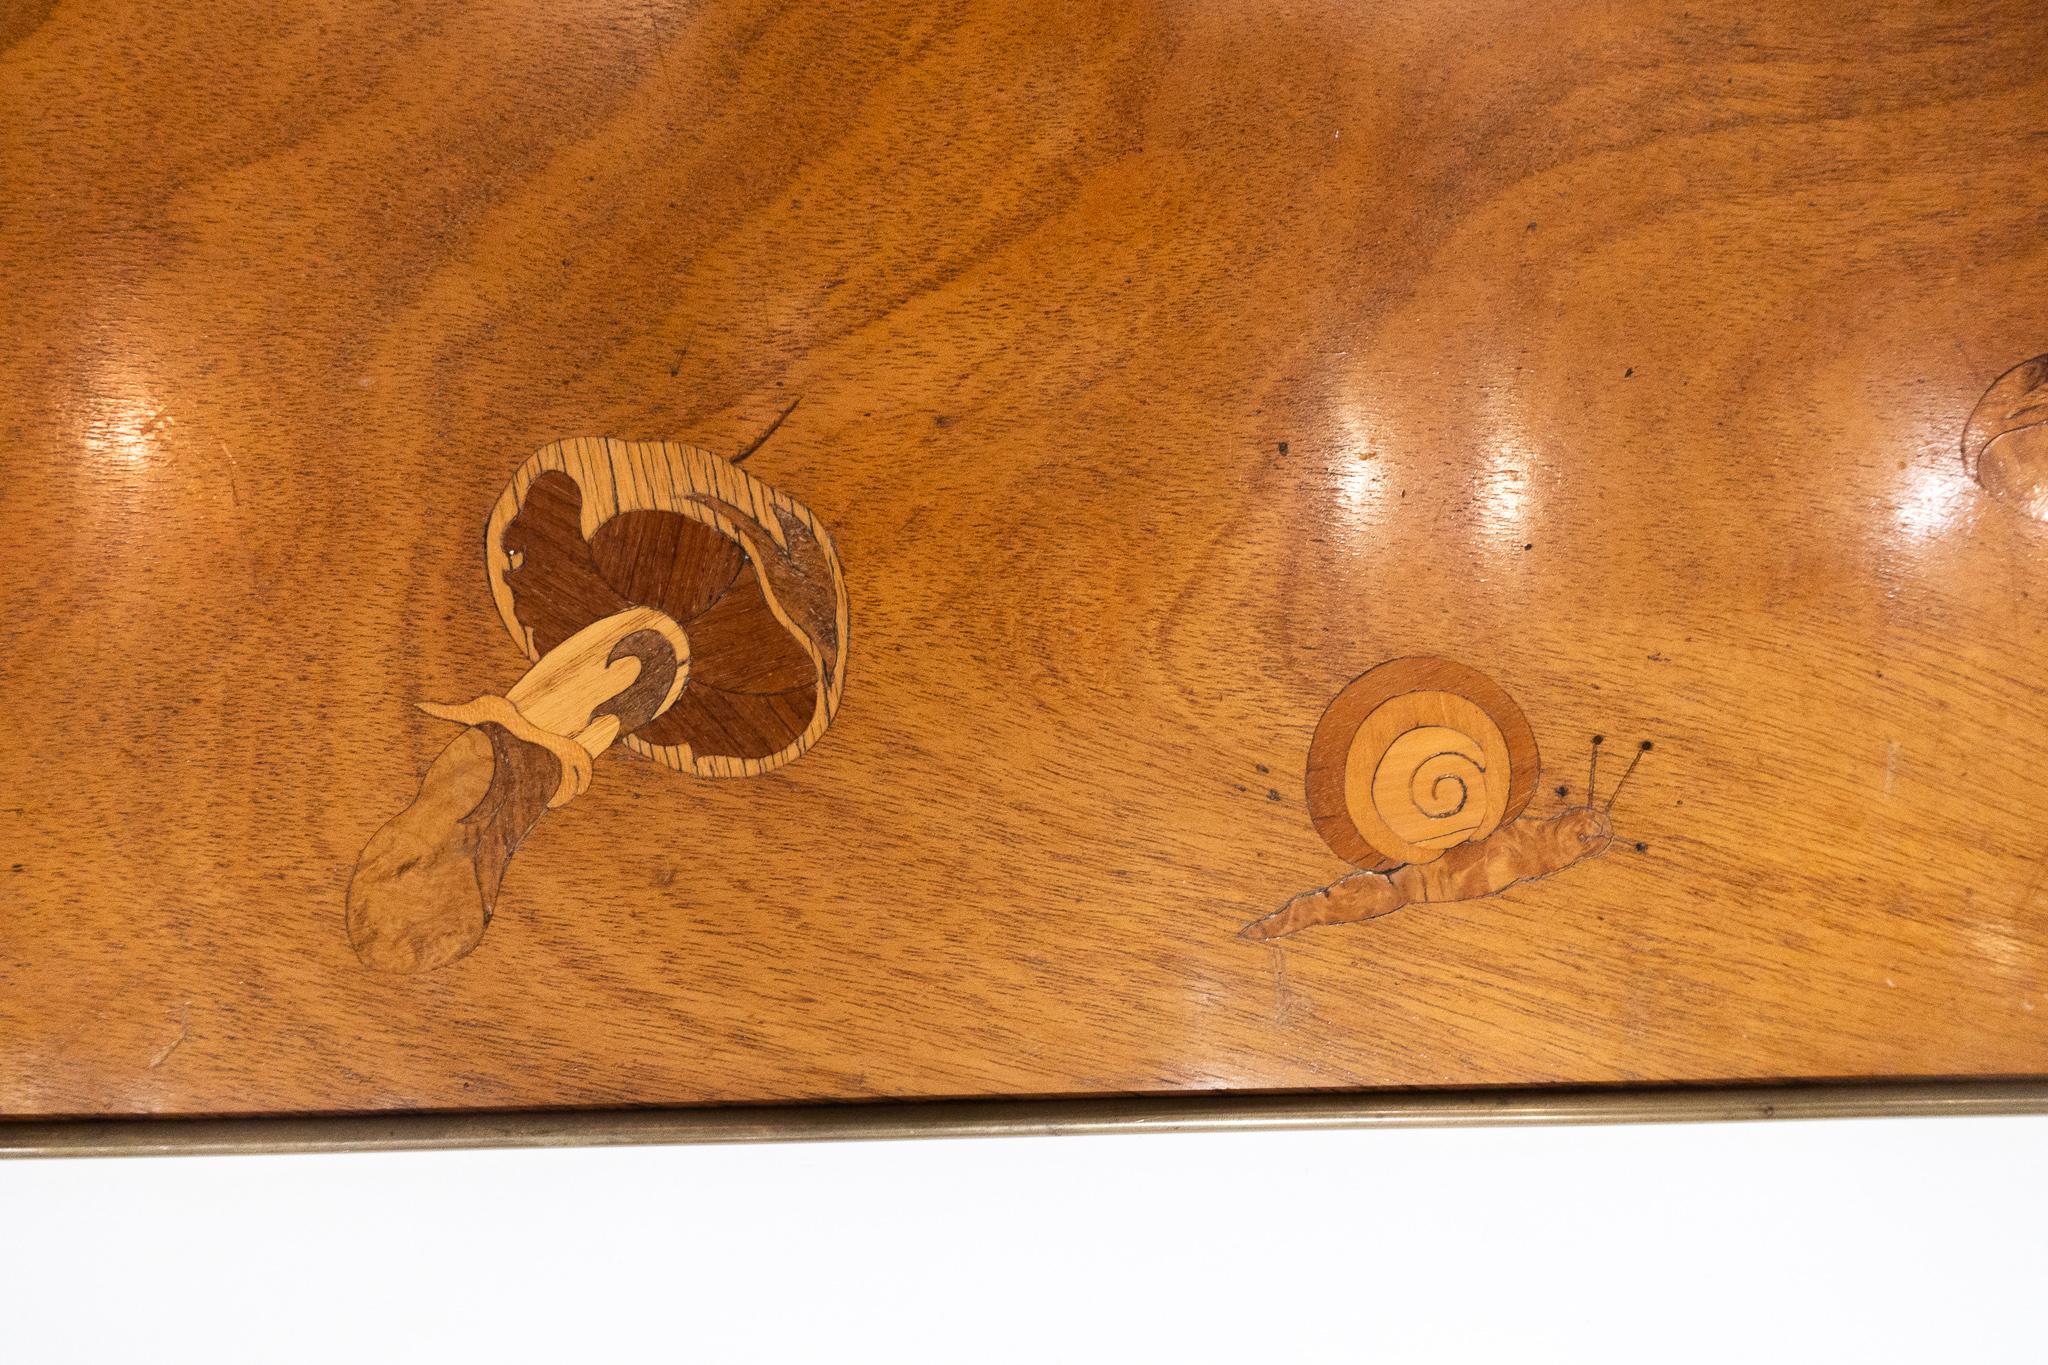 Art Nouveau Inlaid Wooden Panel with Mushrooms and a Butterfly, Signed Christian Dior, Paris